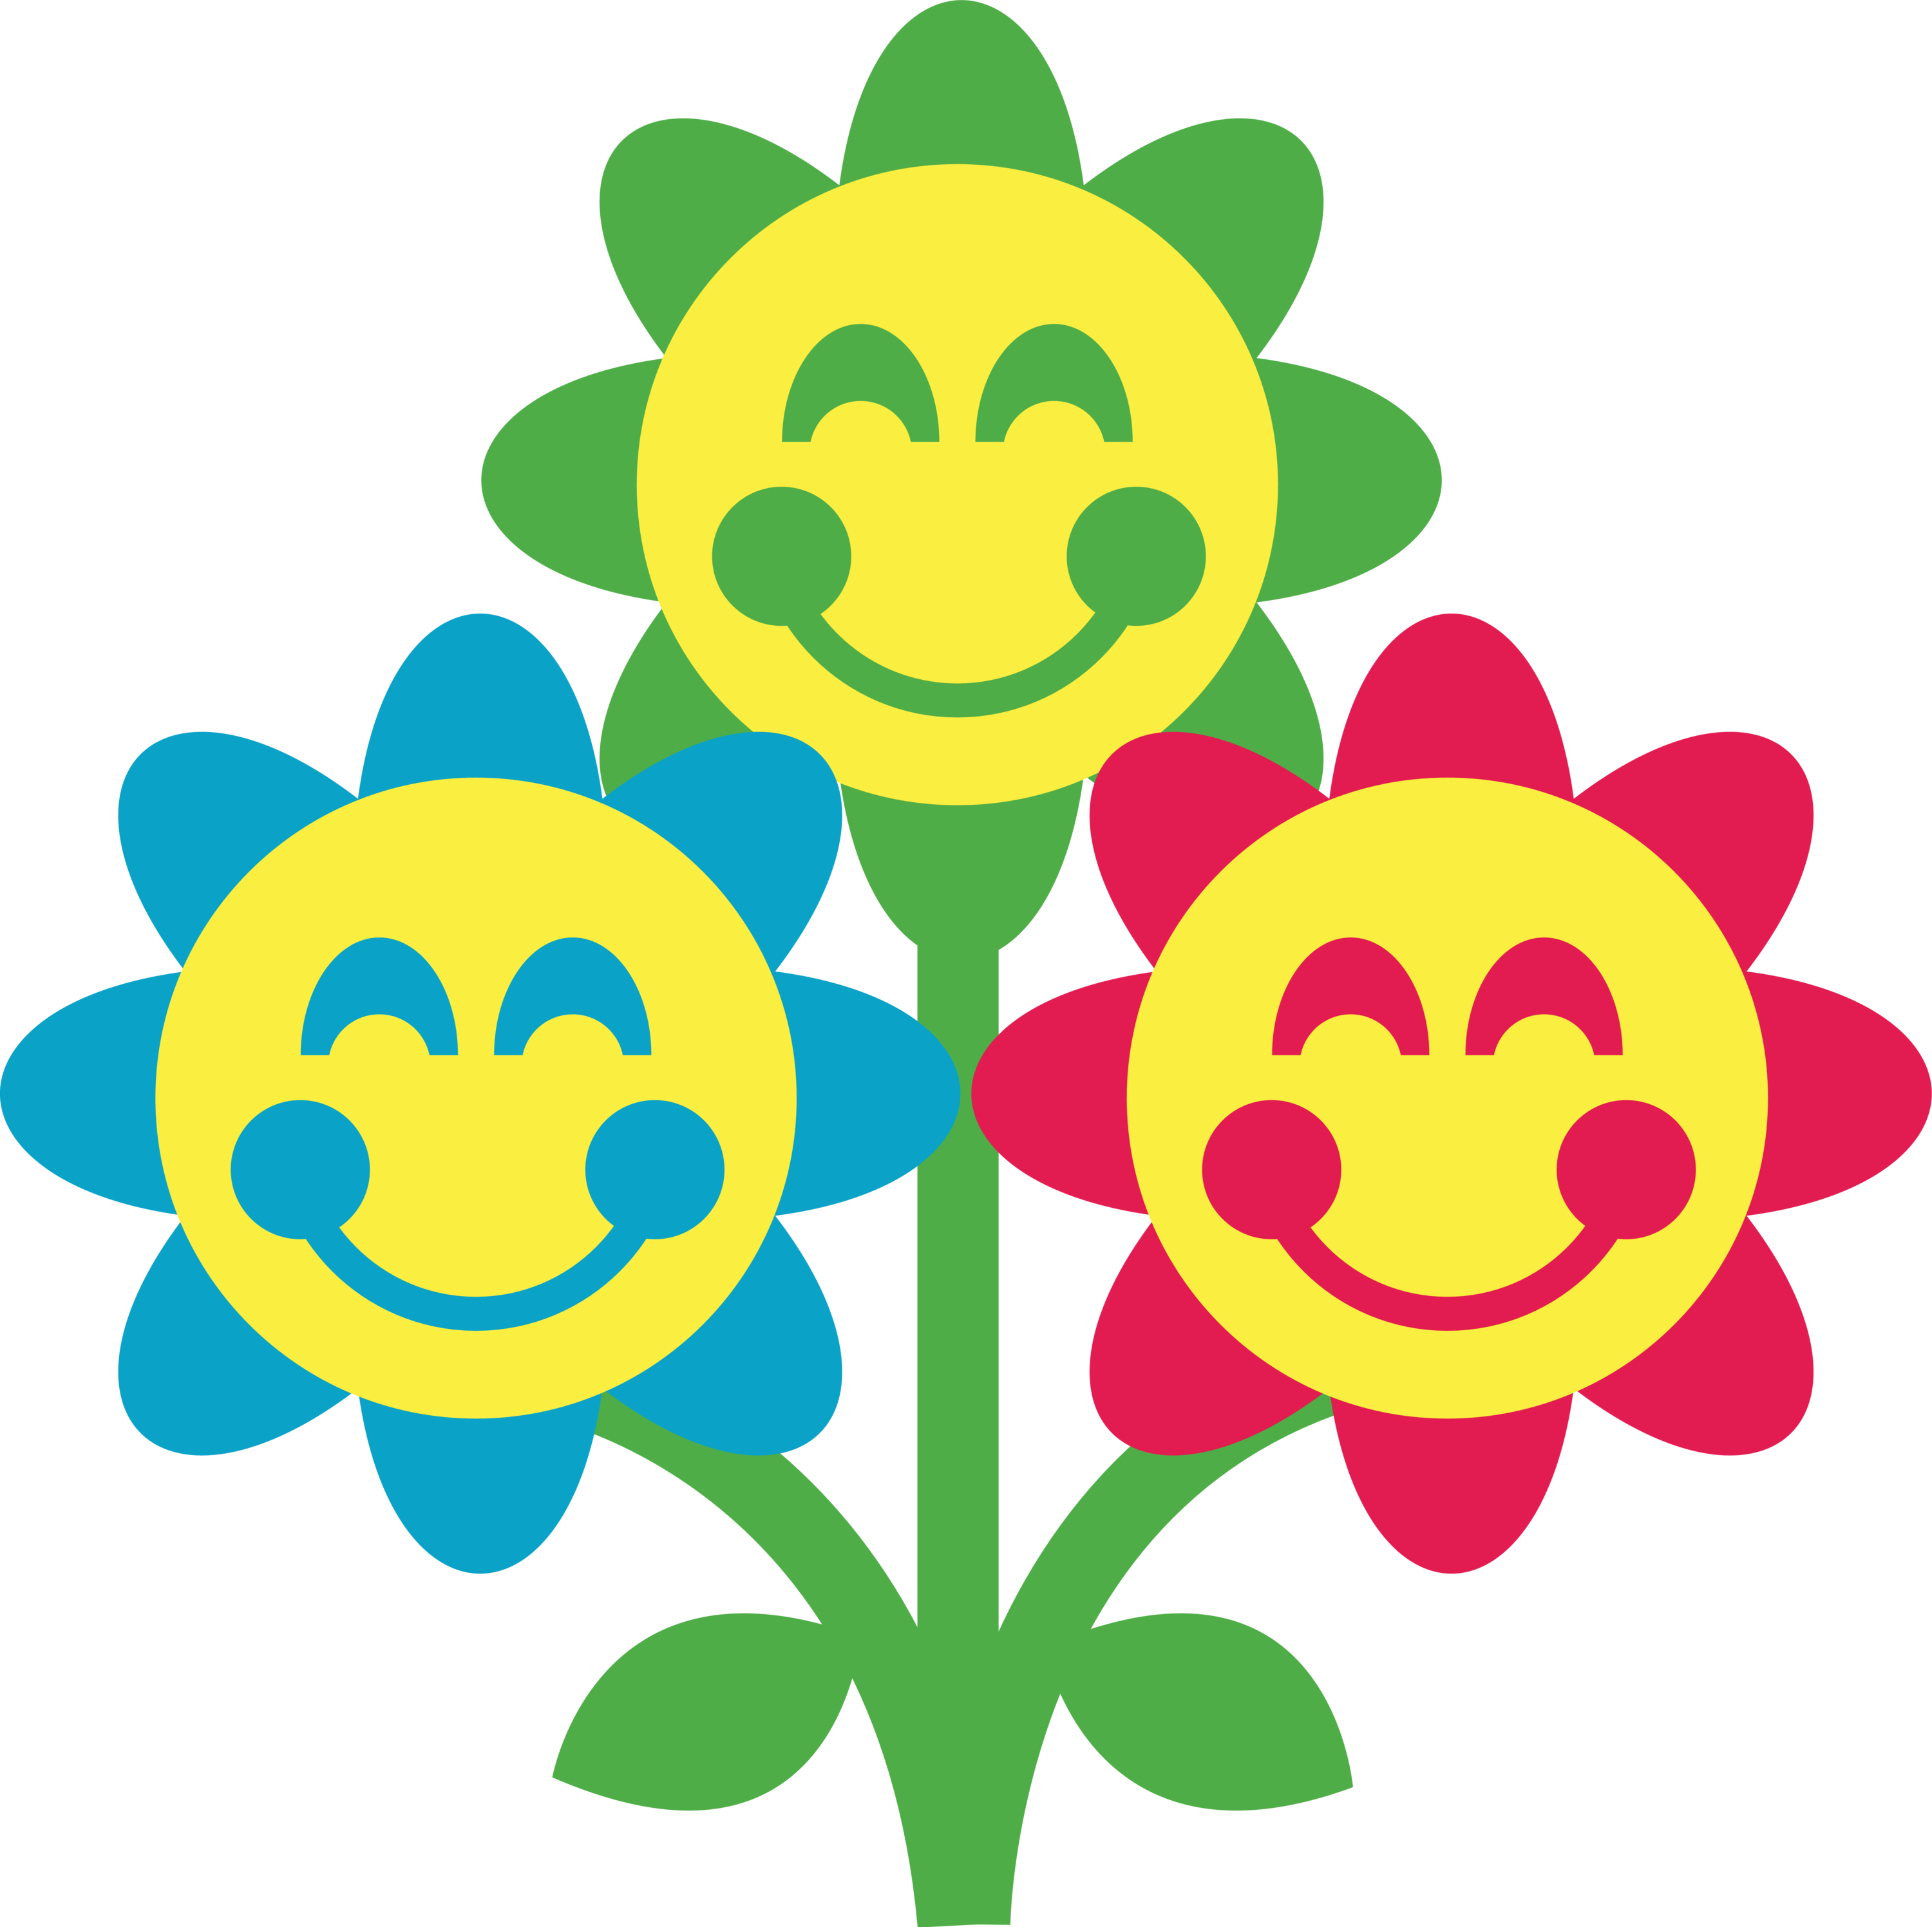 Free Smiley Face Flower Clipart Image - 11992, Smiley Face Flower ...